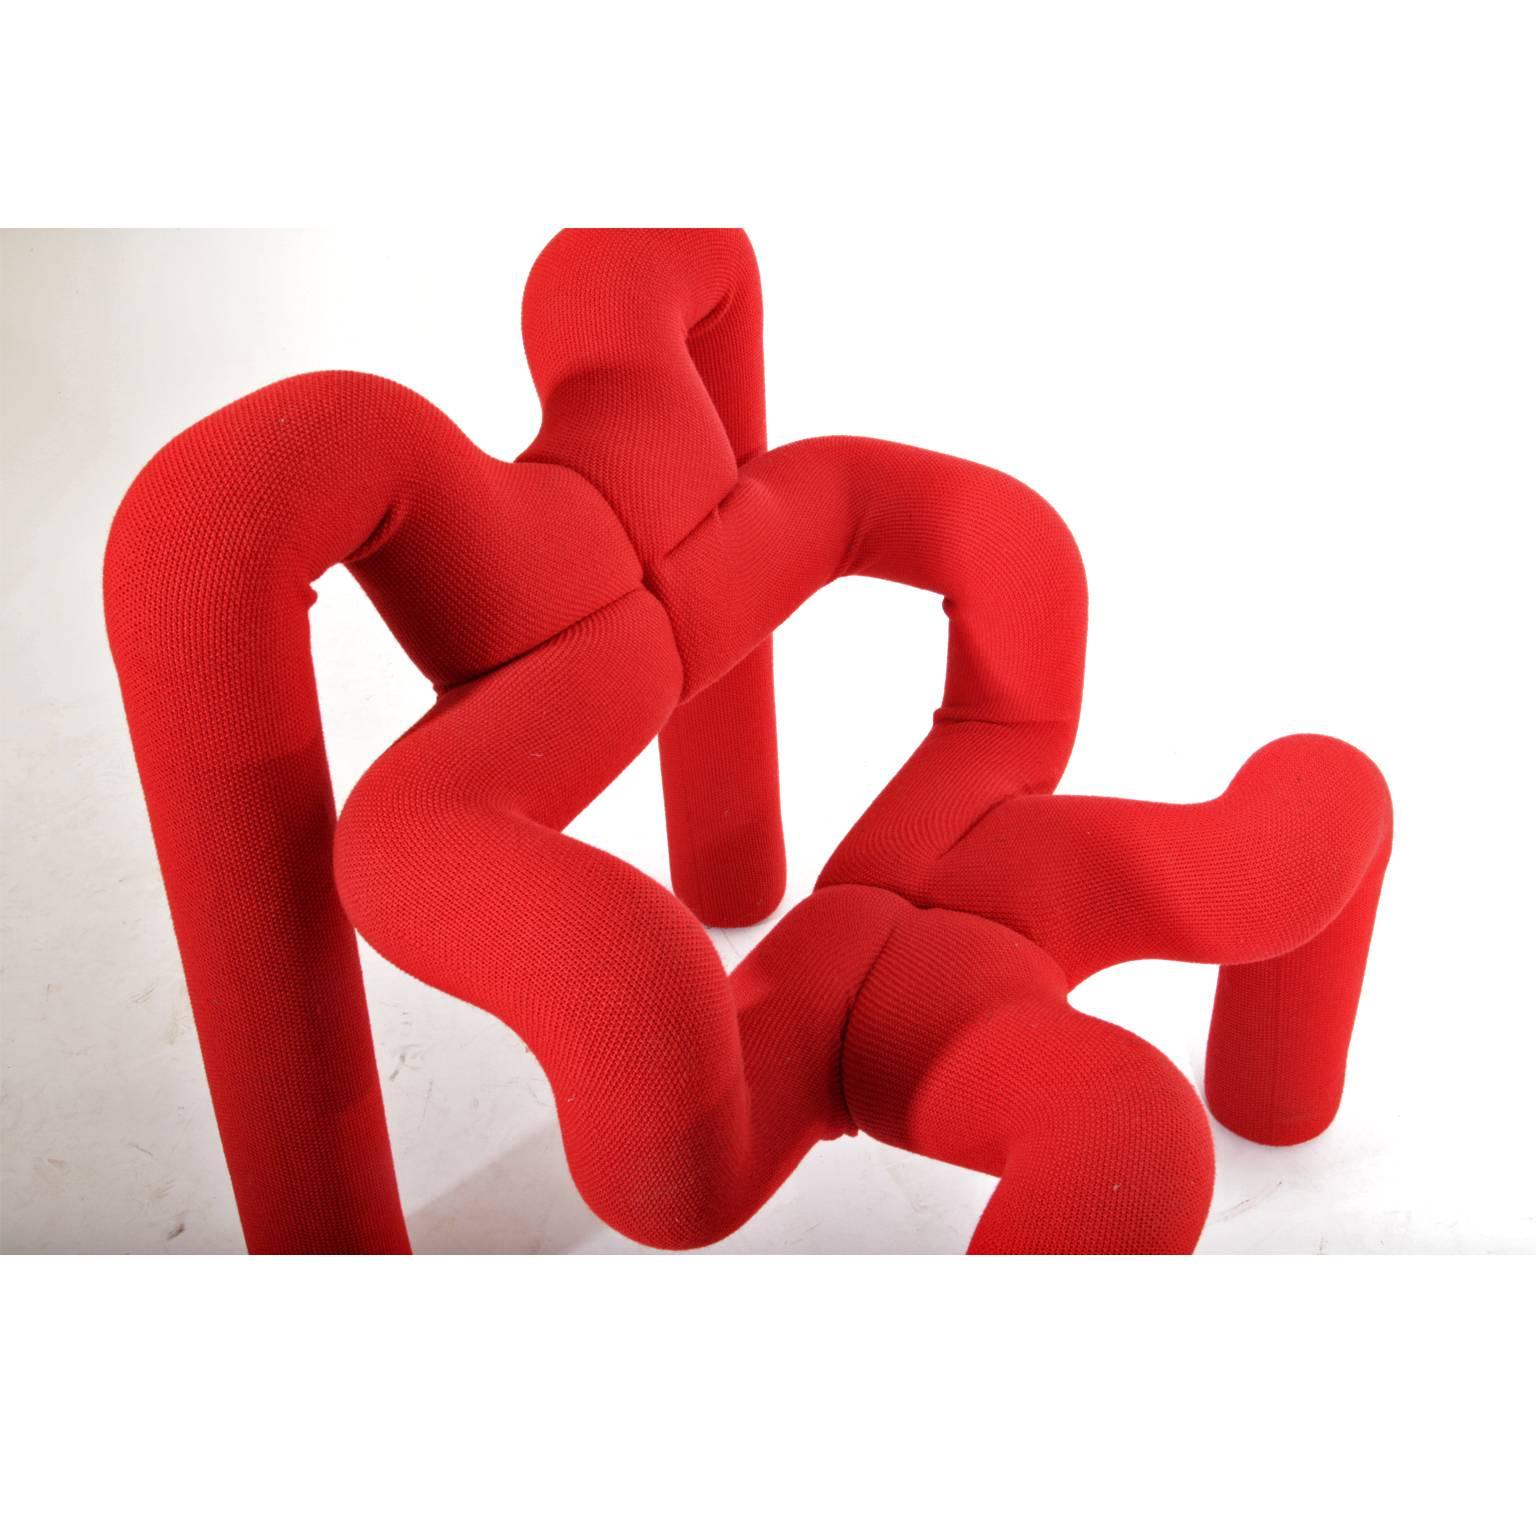 Unusual armchair by the Norwegian designer Terje Ekström. The model is from the year 1972, the chair was in production at Stokke Mobler since the 1980s. Organically fromed, completely upholstered frame in a red fabric.